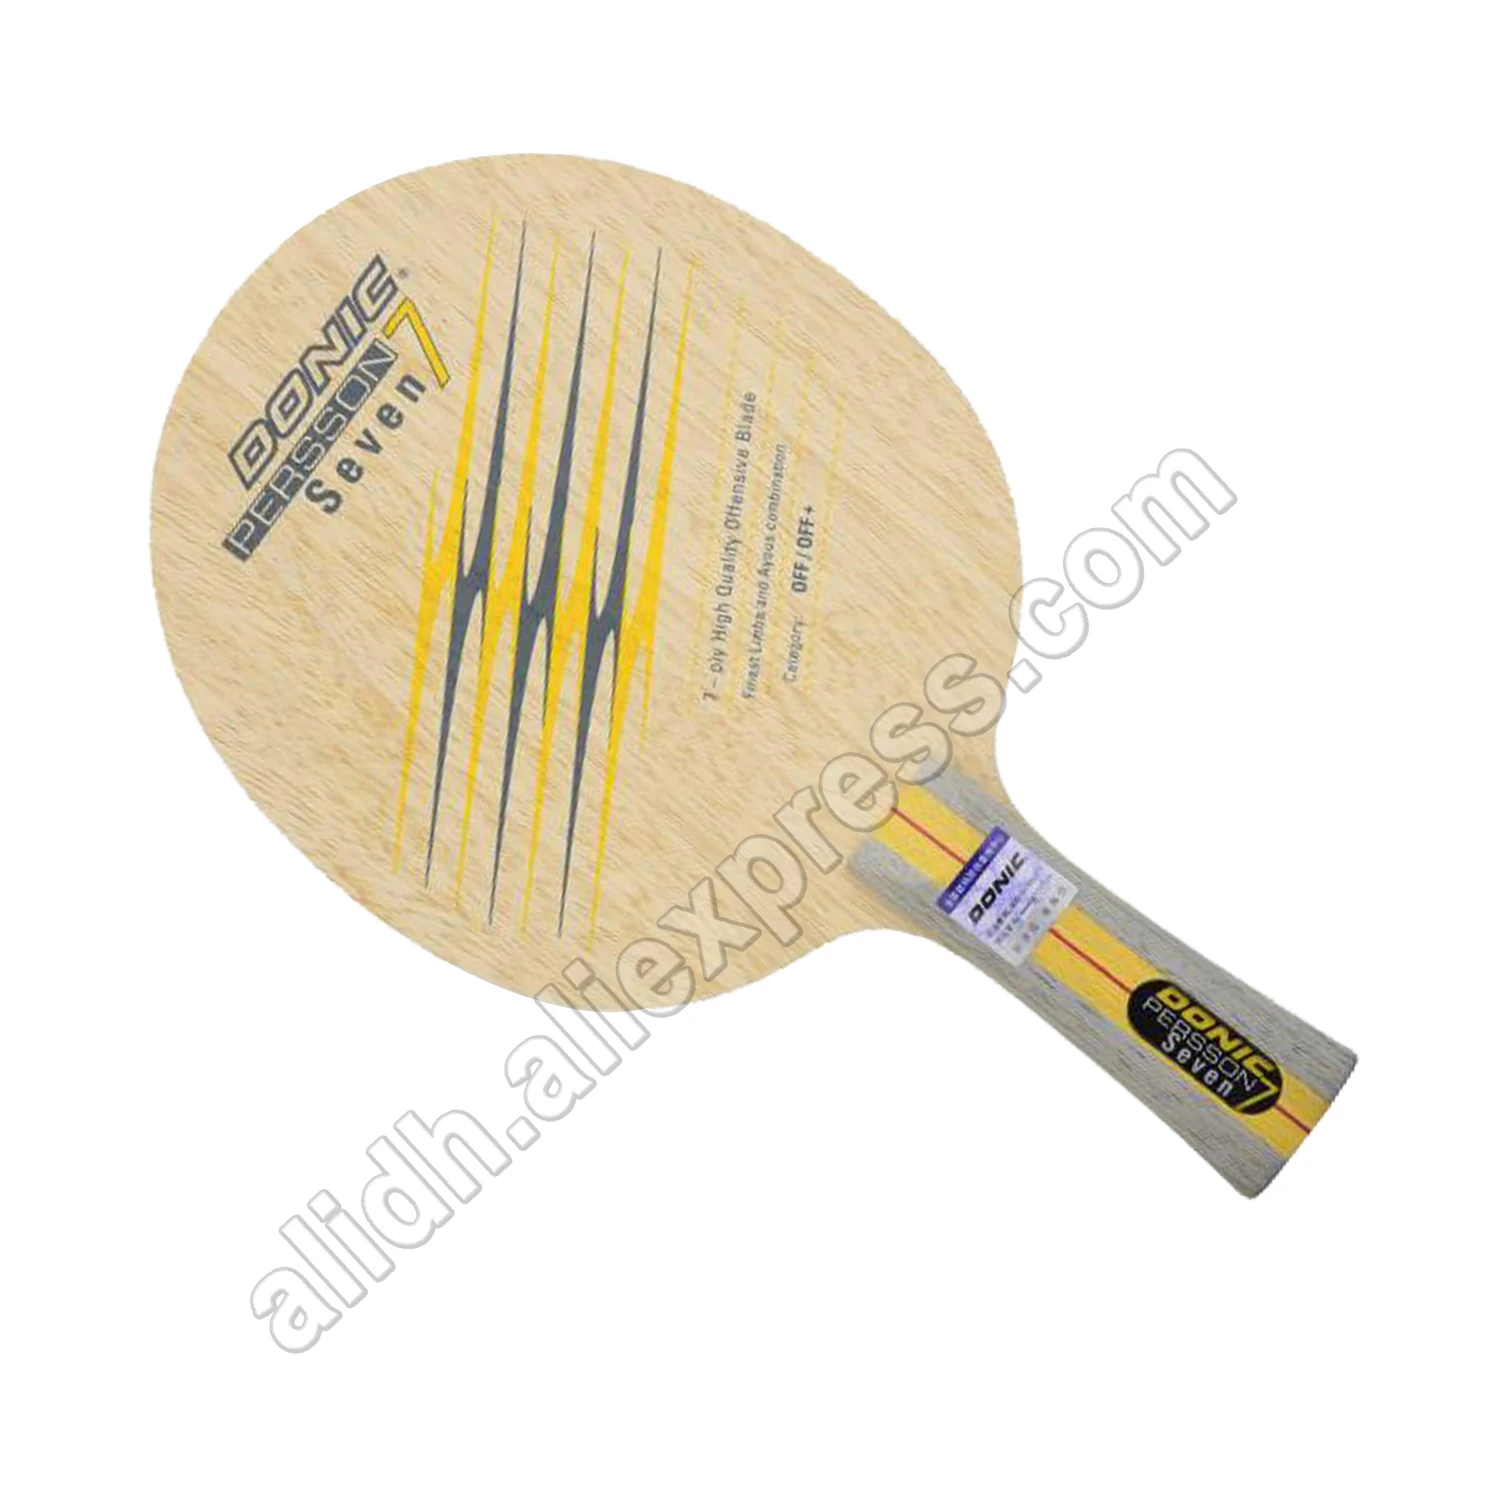 Original Donic PERSSON SEVEN table tennis blade table tennis rackets racquet sports 22933 33933 Lam RenMu + Ayoob